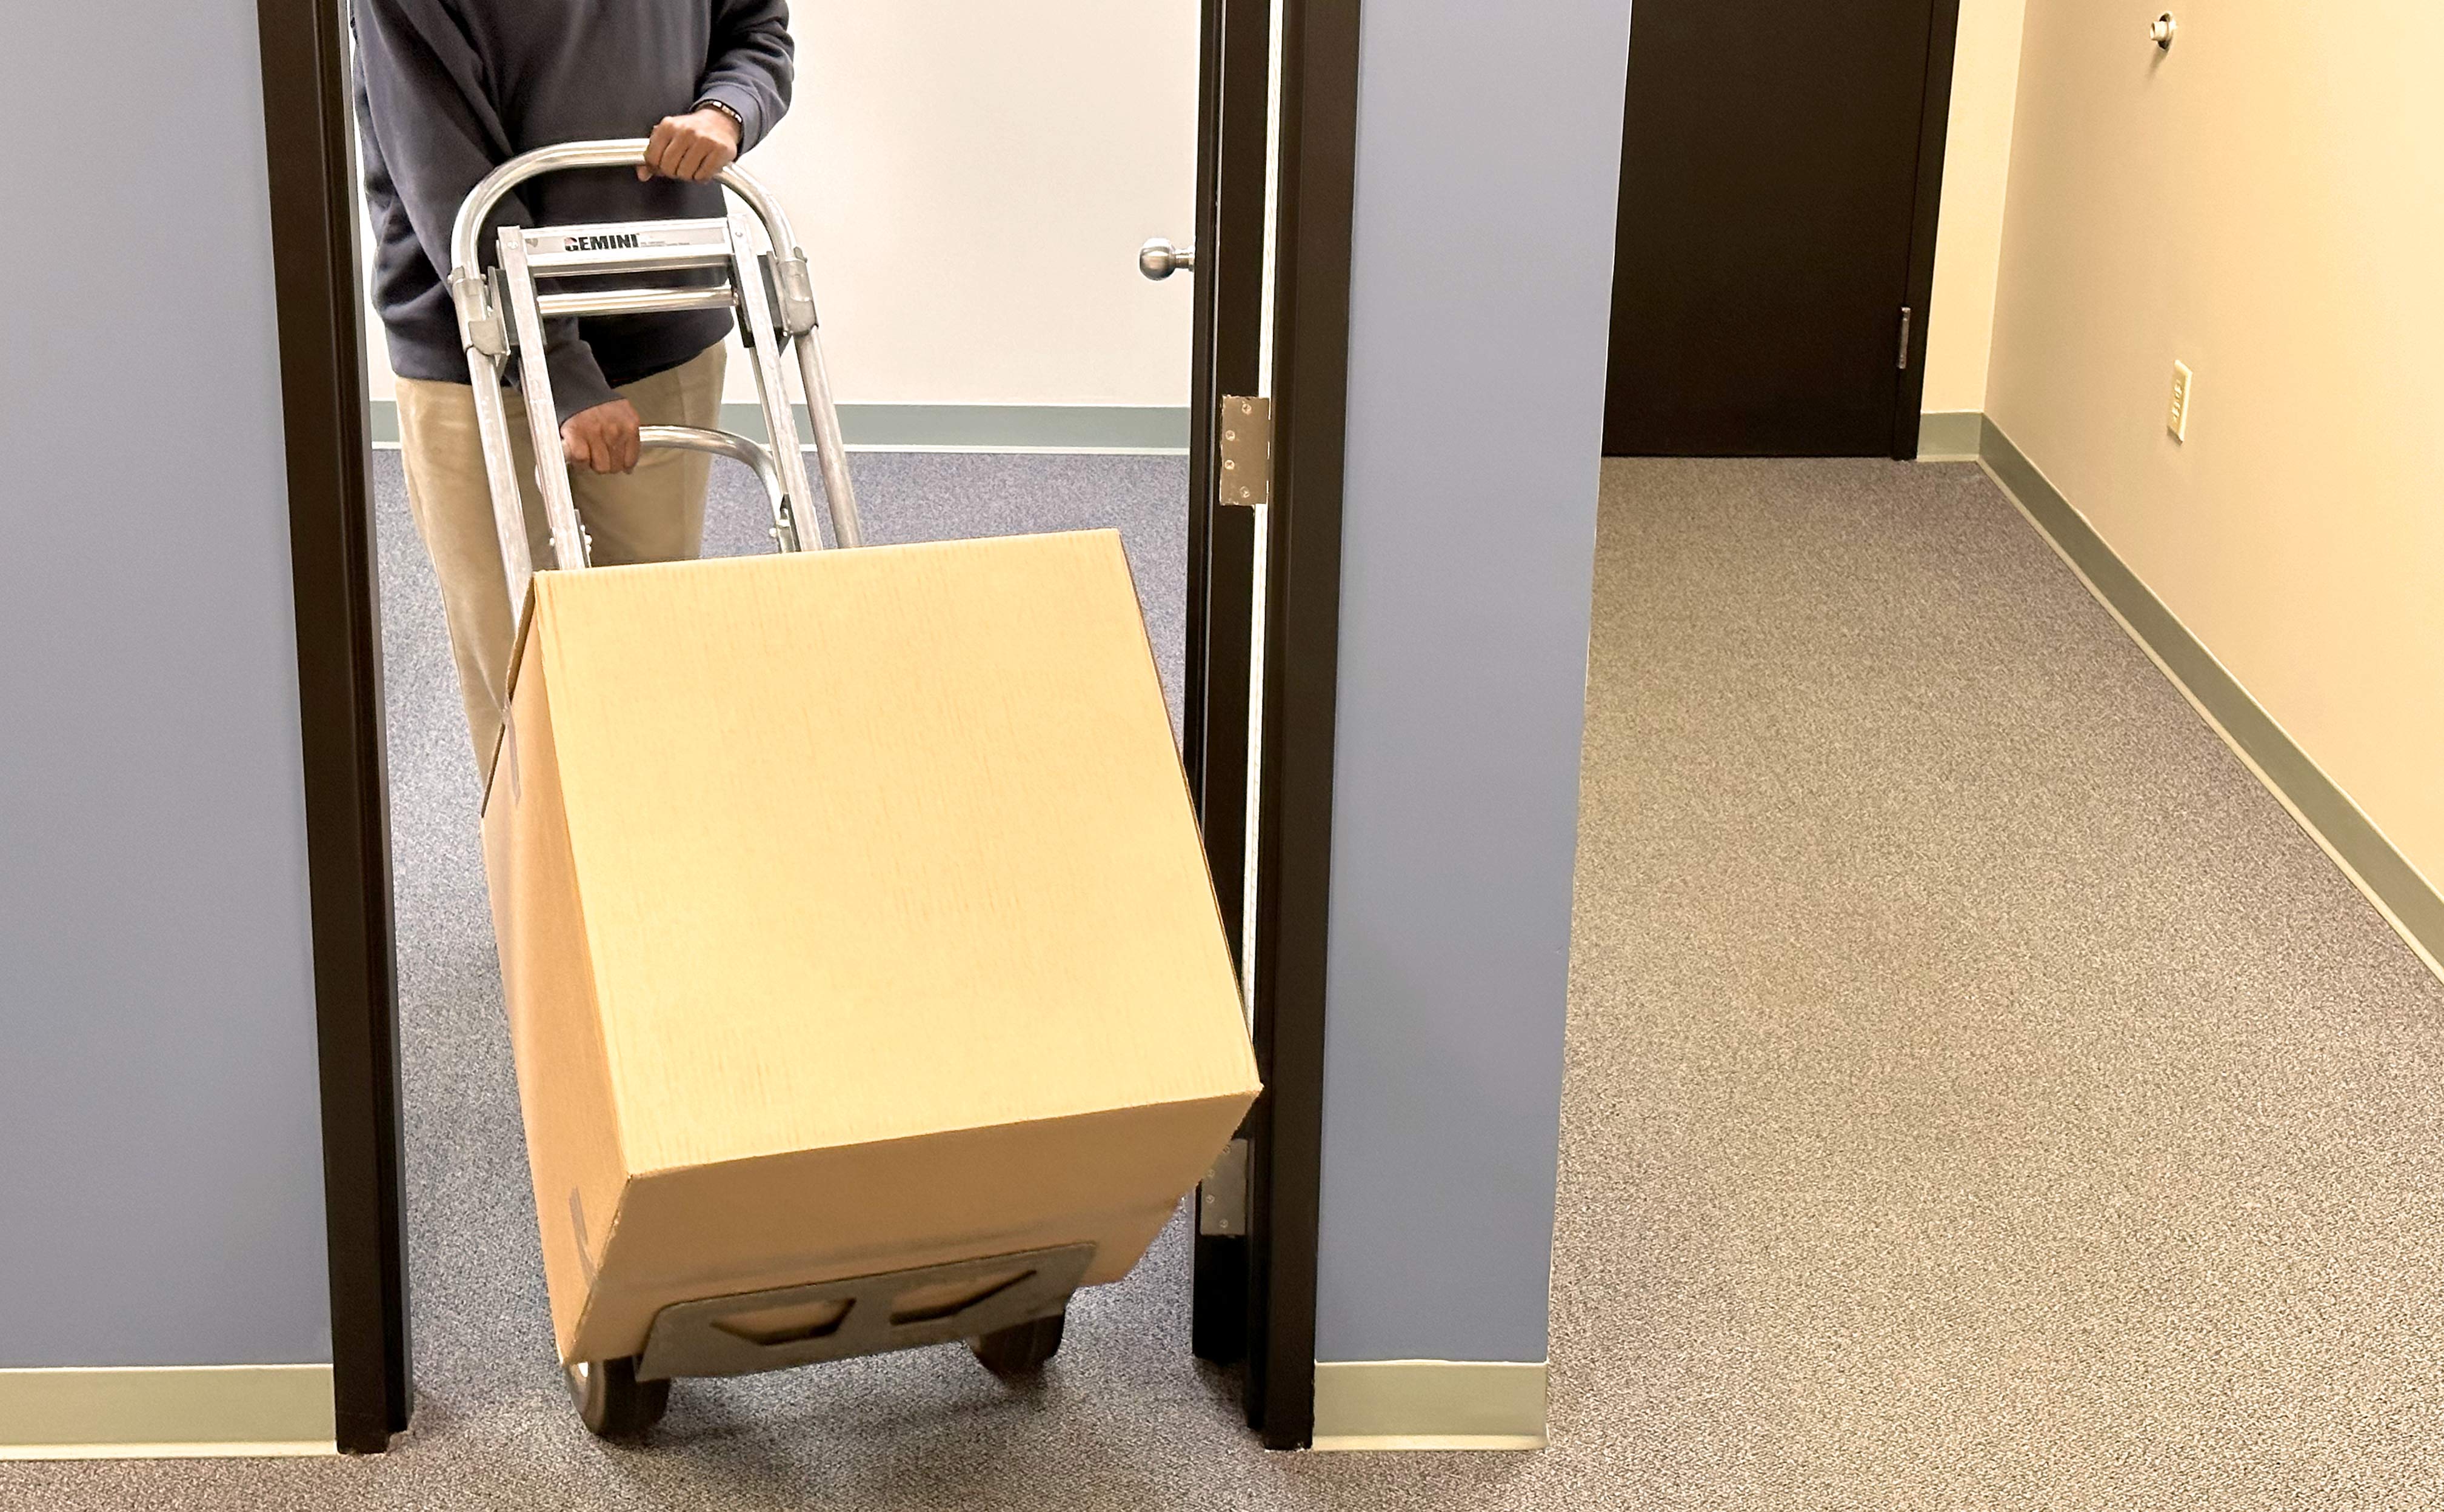 70 pound electronics recycle box on dolly - man pushing dolly with loaded box through an office doorway